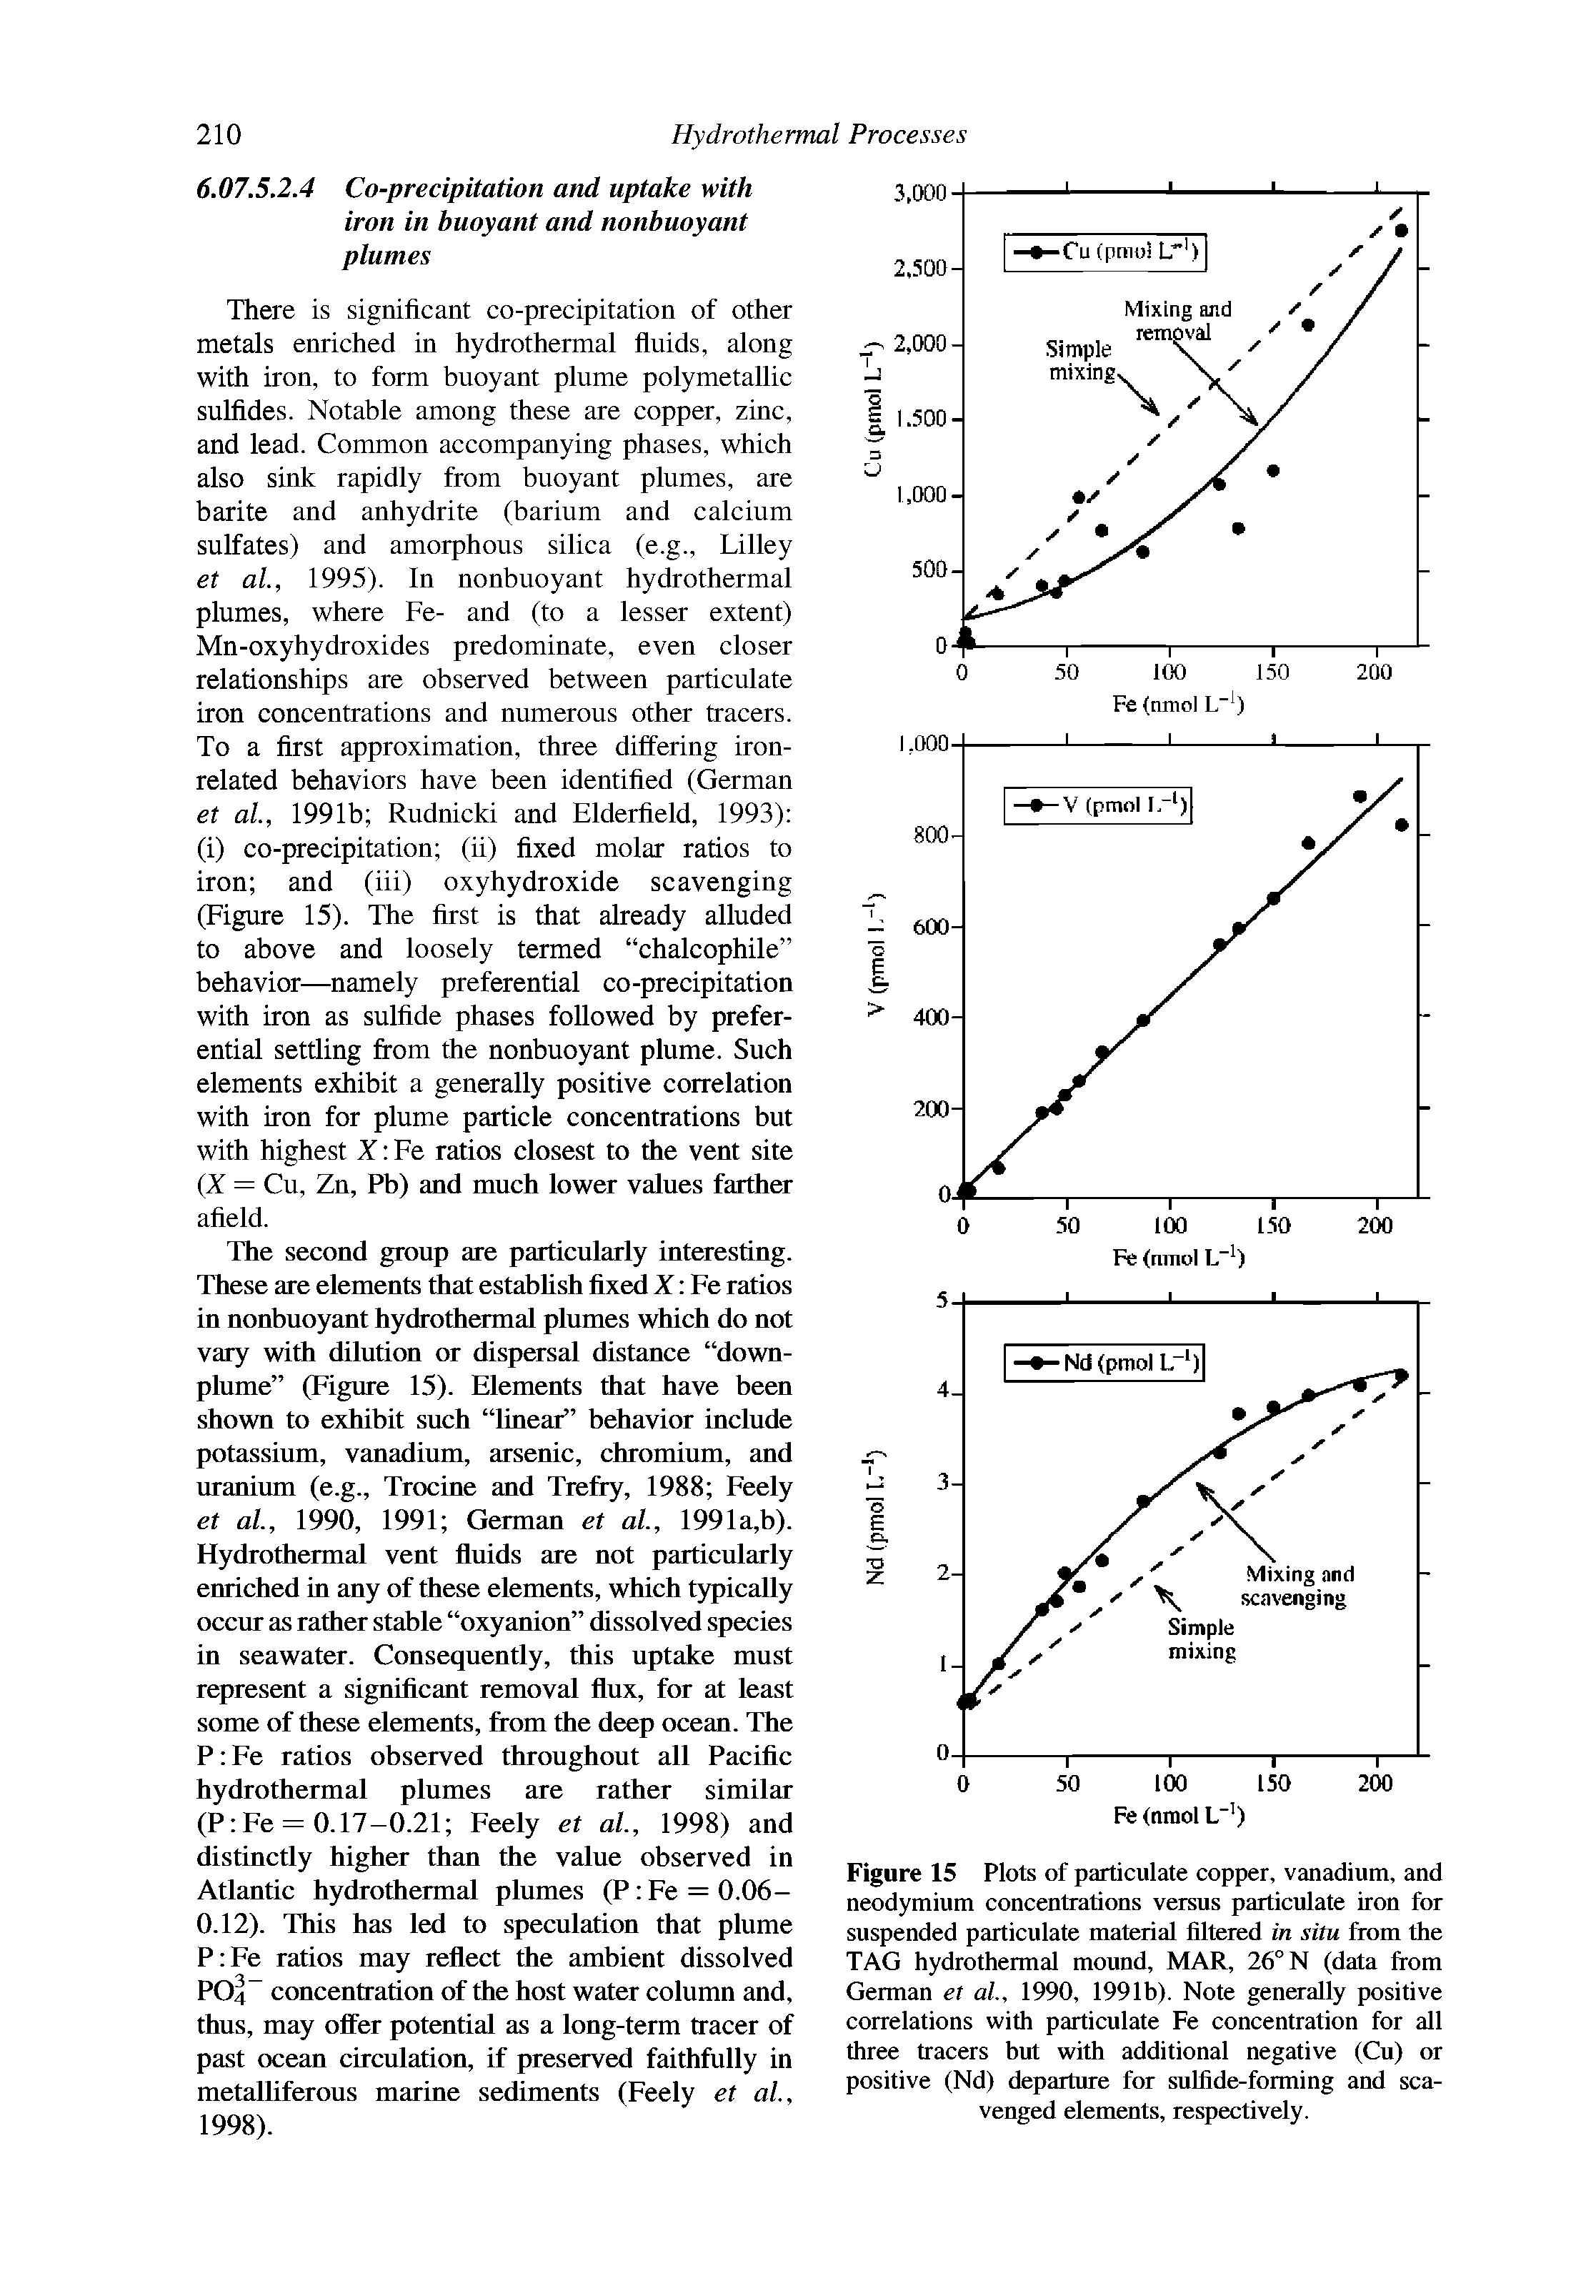 Figure 15 Plots of particulate copper, vanadium, and neodymium concentrations versus particulate iron for suspended particulate material filtered in situ from the TAG hydrothermal mound, MAR, 26° N (data from German et al., 1990, 1991b). Note generally positive correlations with particulate Fe concentration for all three tracers but with additional negative (Cu) or positive (Nd) departure for sulfide-forming and scavenged elements, respectively.